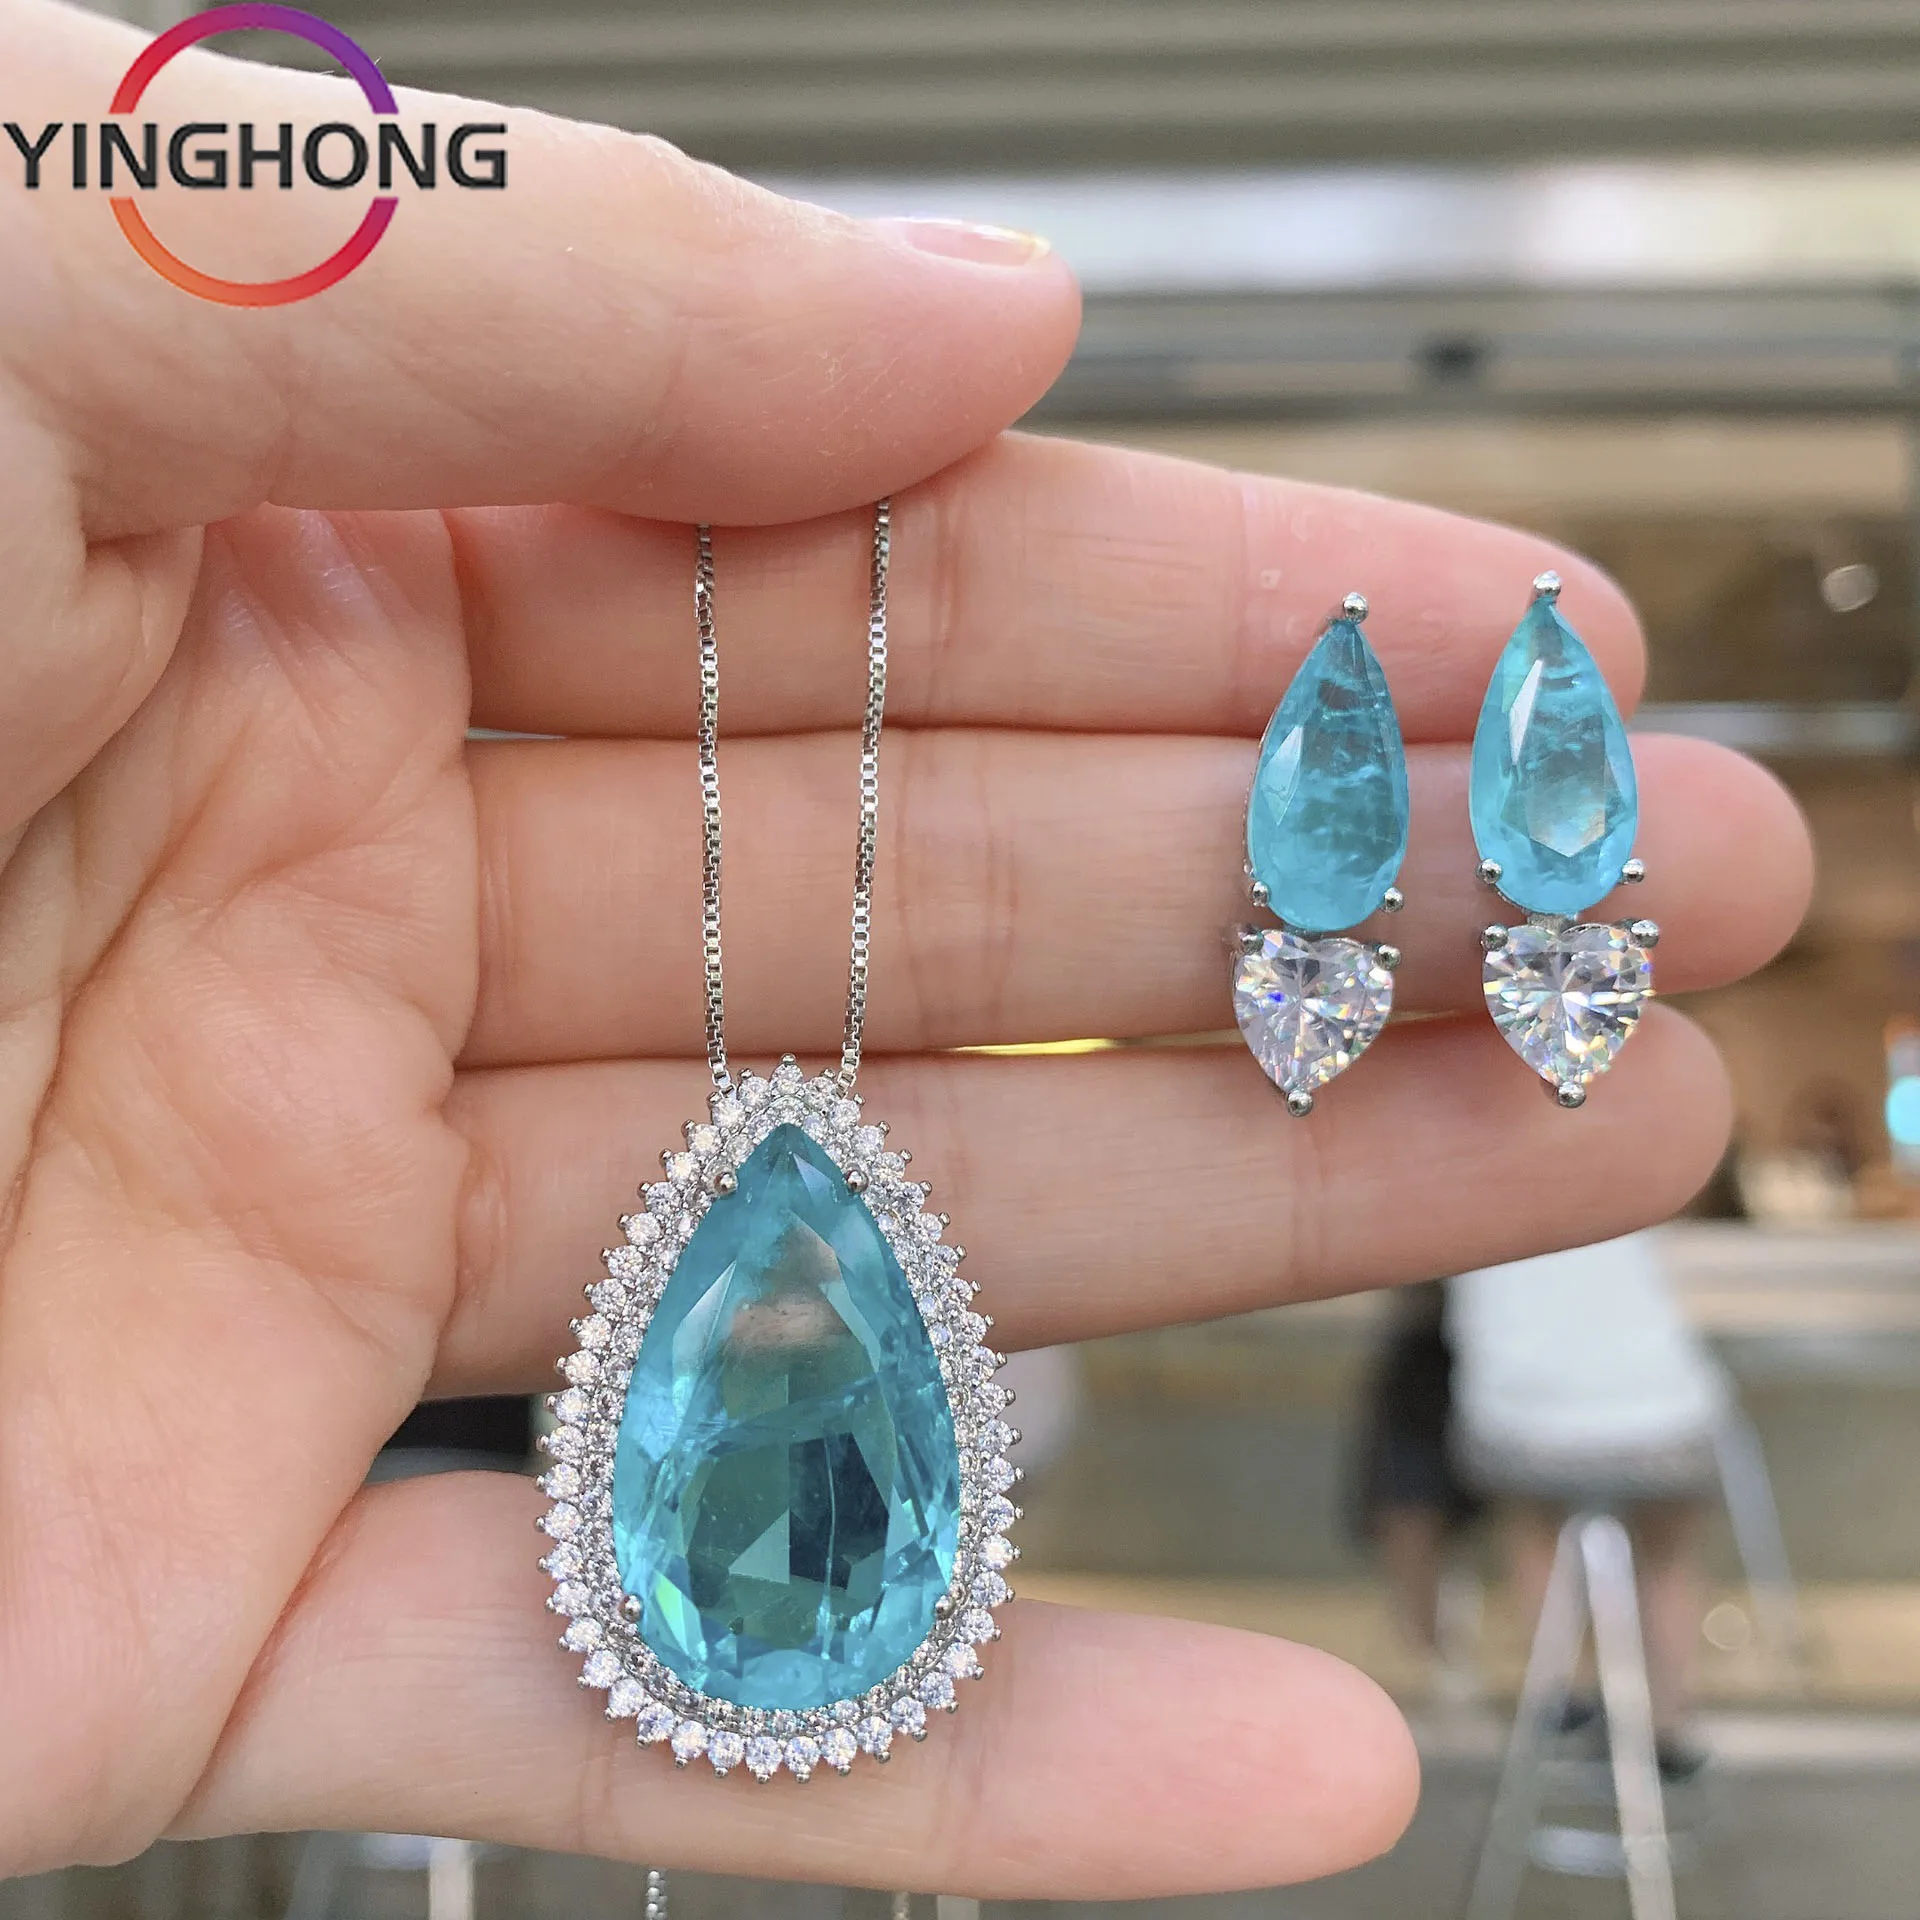 

QueXiang 2023 New S925 Sterling Silver Palaiba Stone Jewelry Set Pendant Earstuds Women's Charm Fashion Luxury Gift